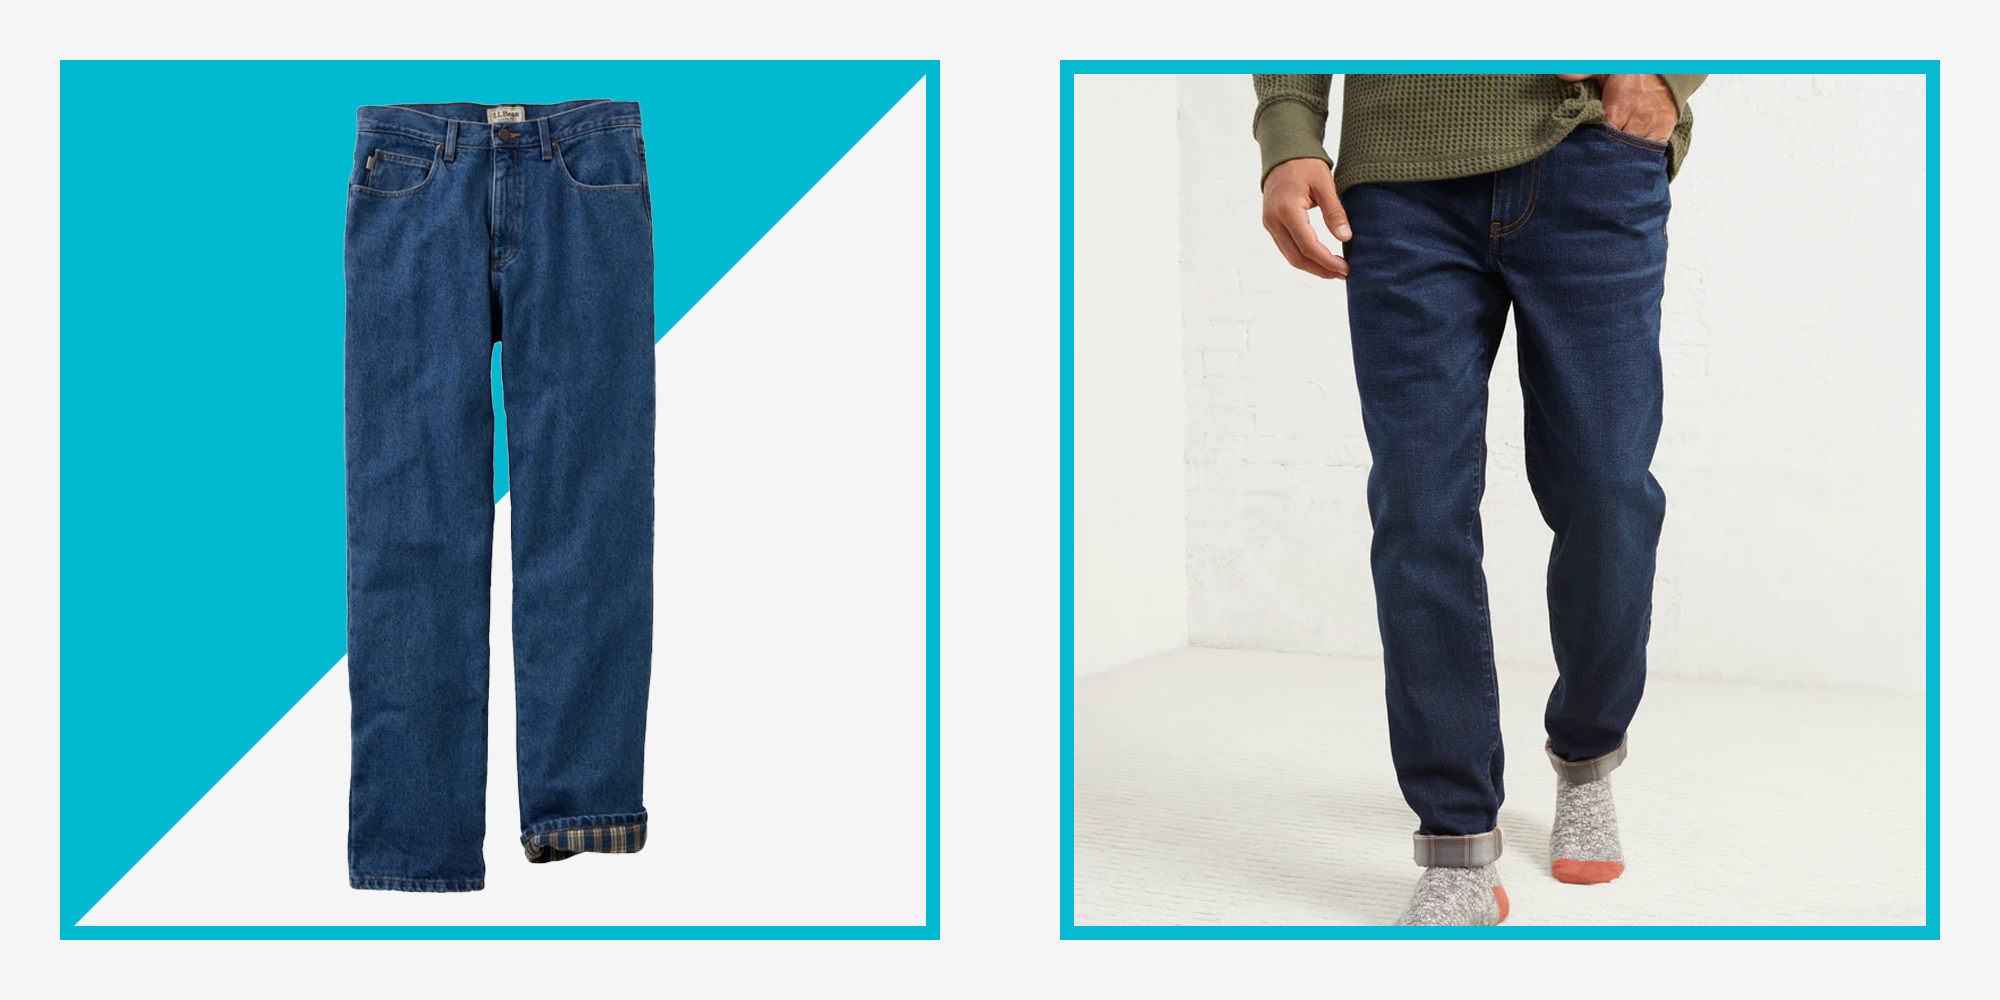 Buy Flex Twill Pant Men's Jeans & Pants from Buyers Picks. Find